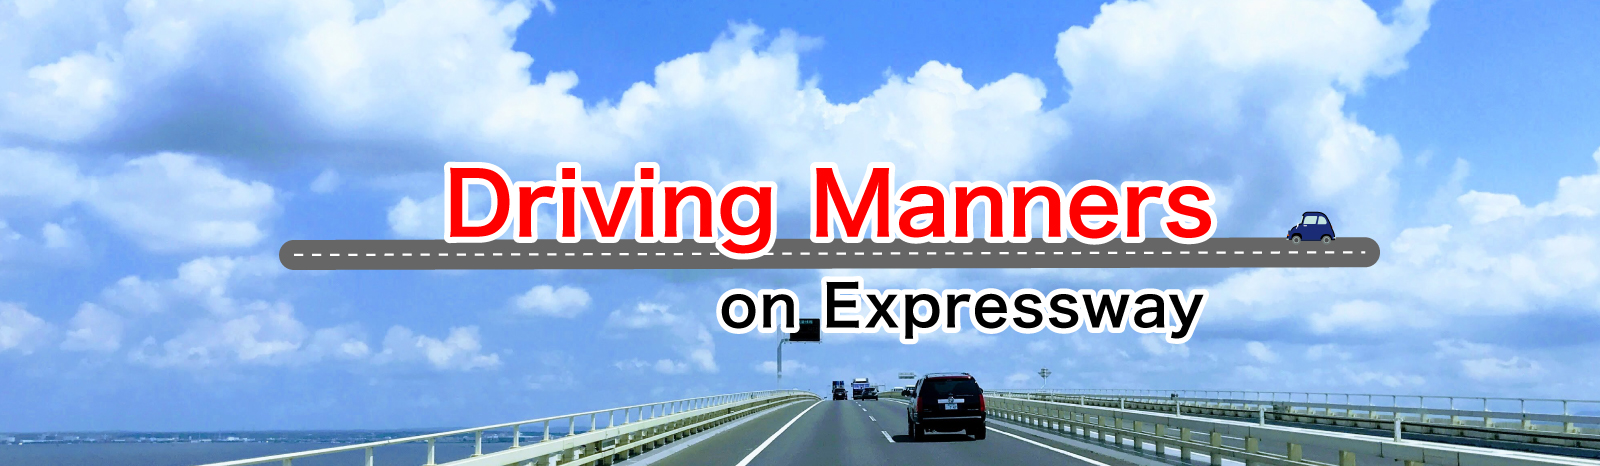 Driving Manners on Expressway